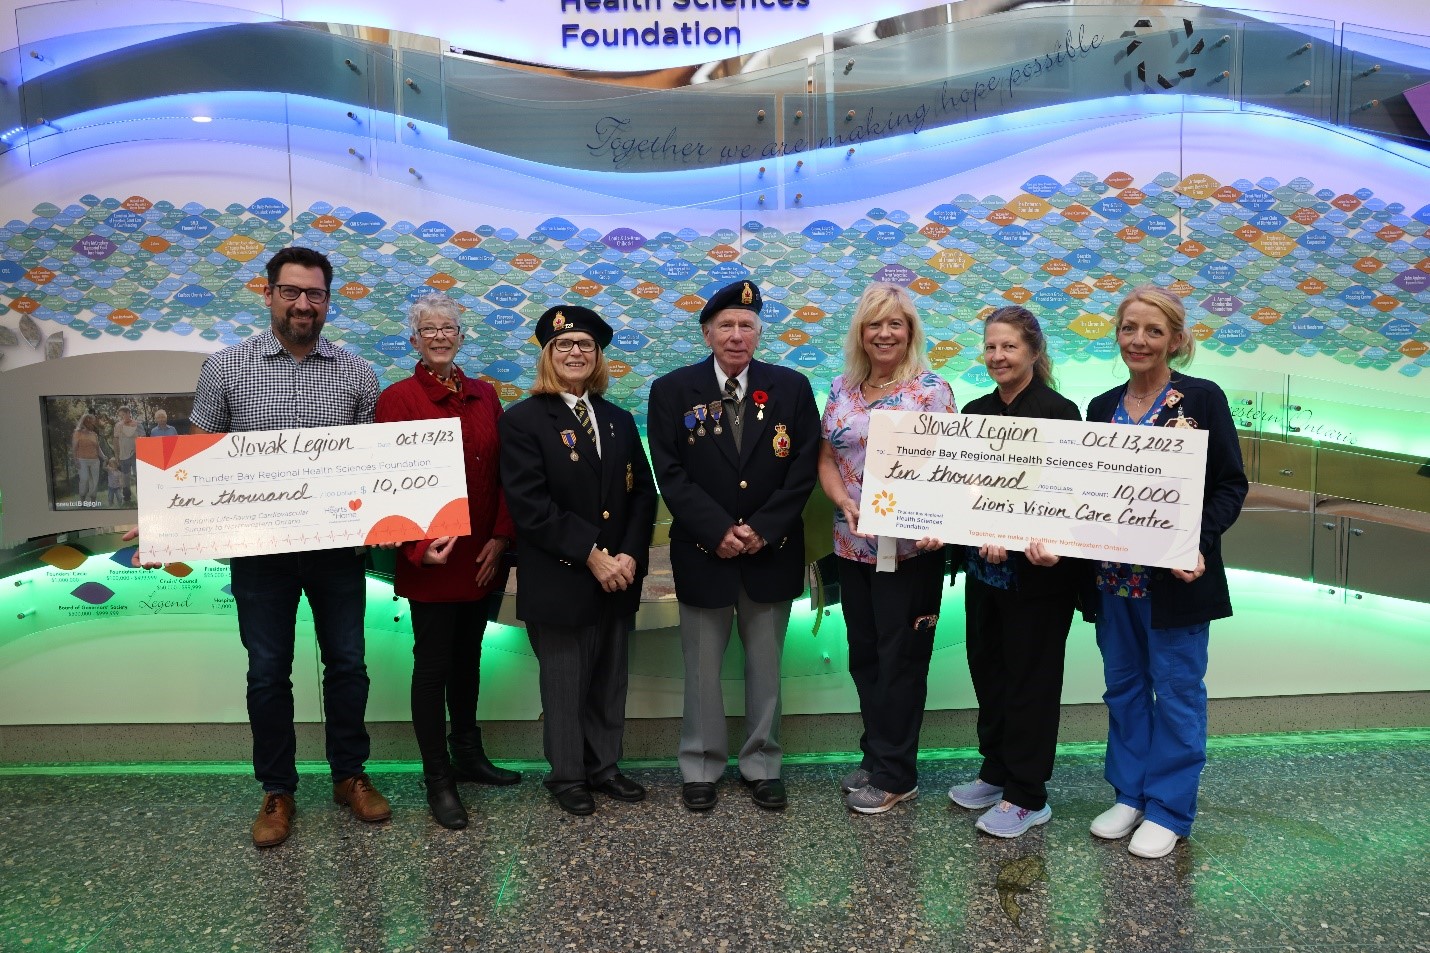 The Slovak Legion Branch #129's Southside Poppy Campaign Supports Local Healthcare in a Big Way! 